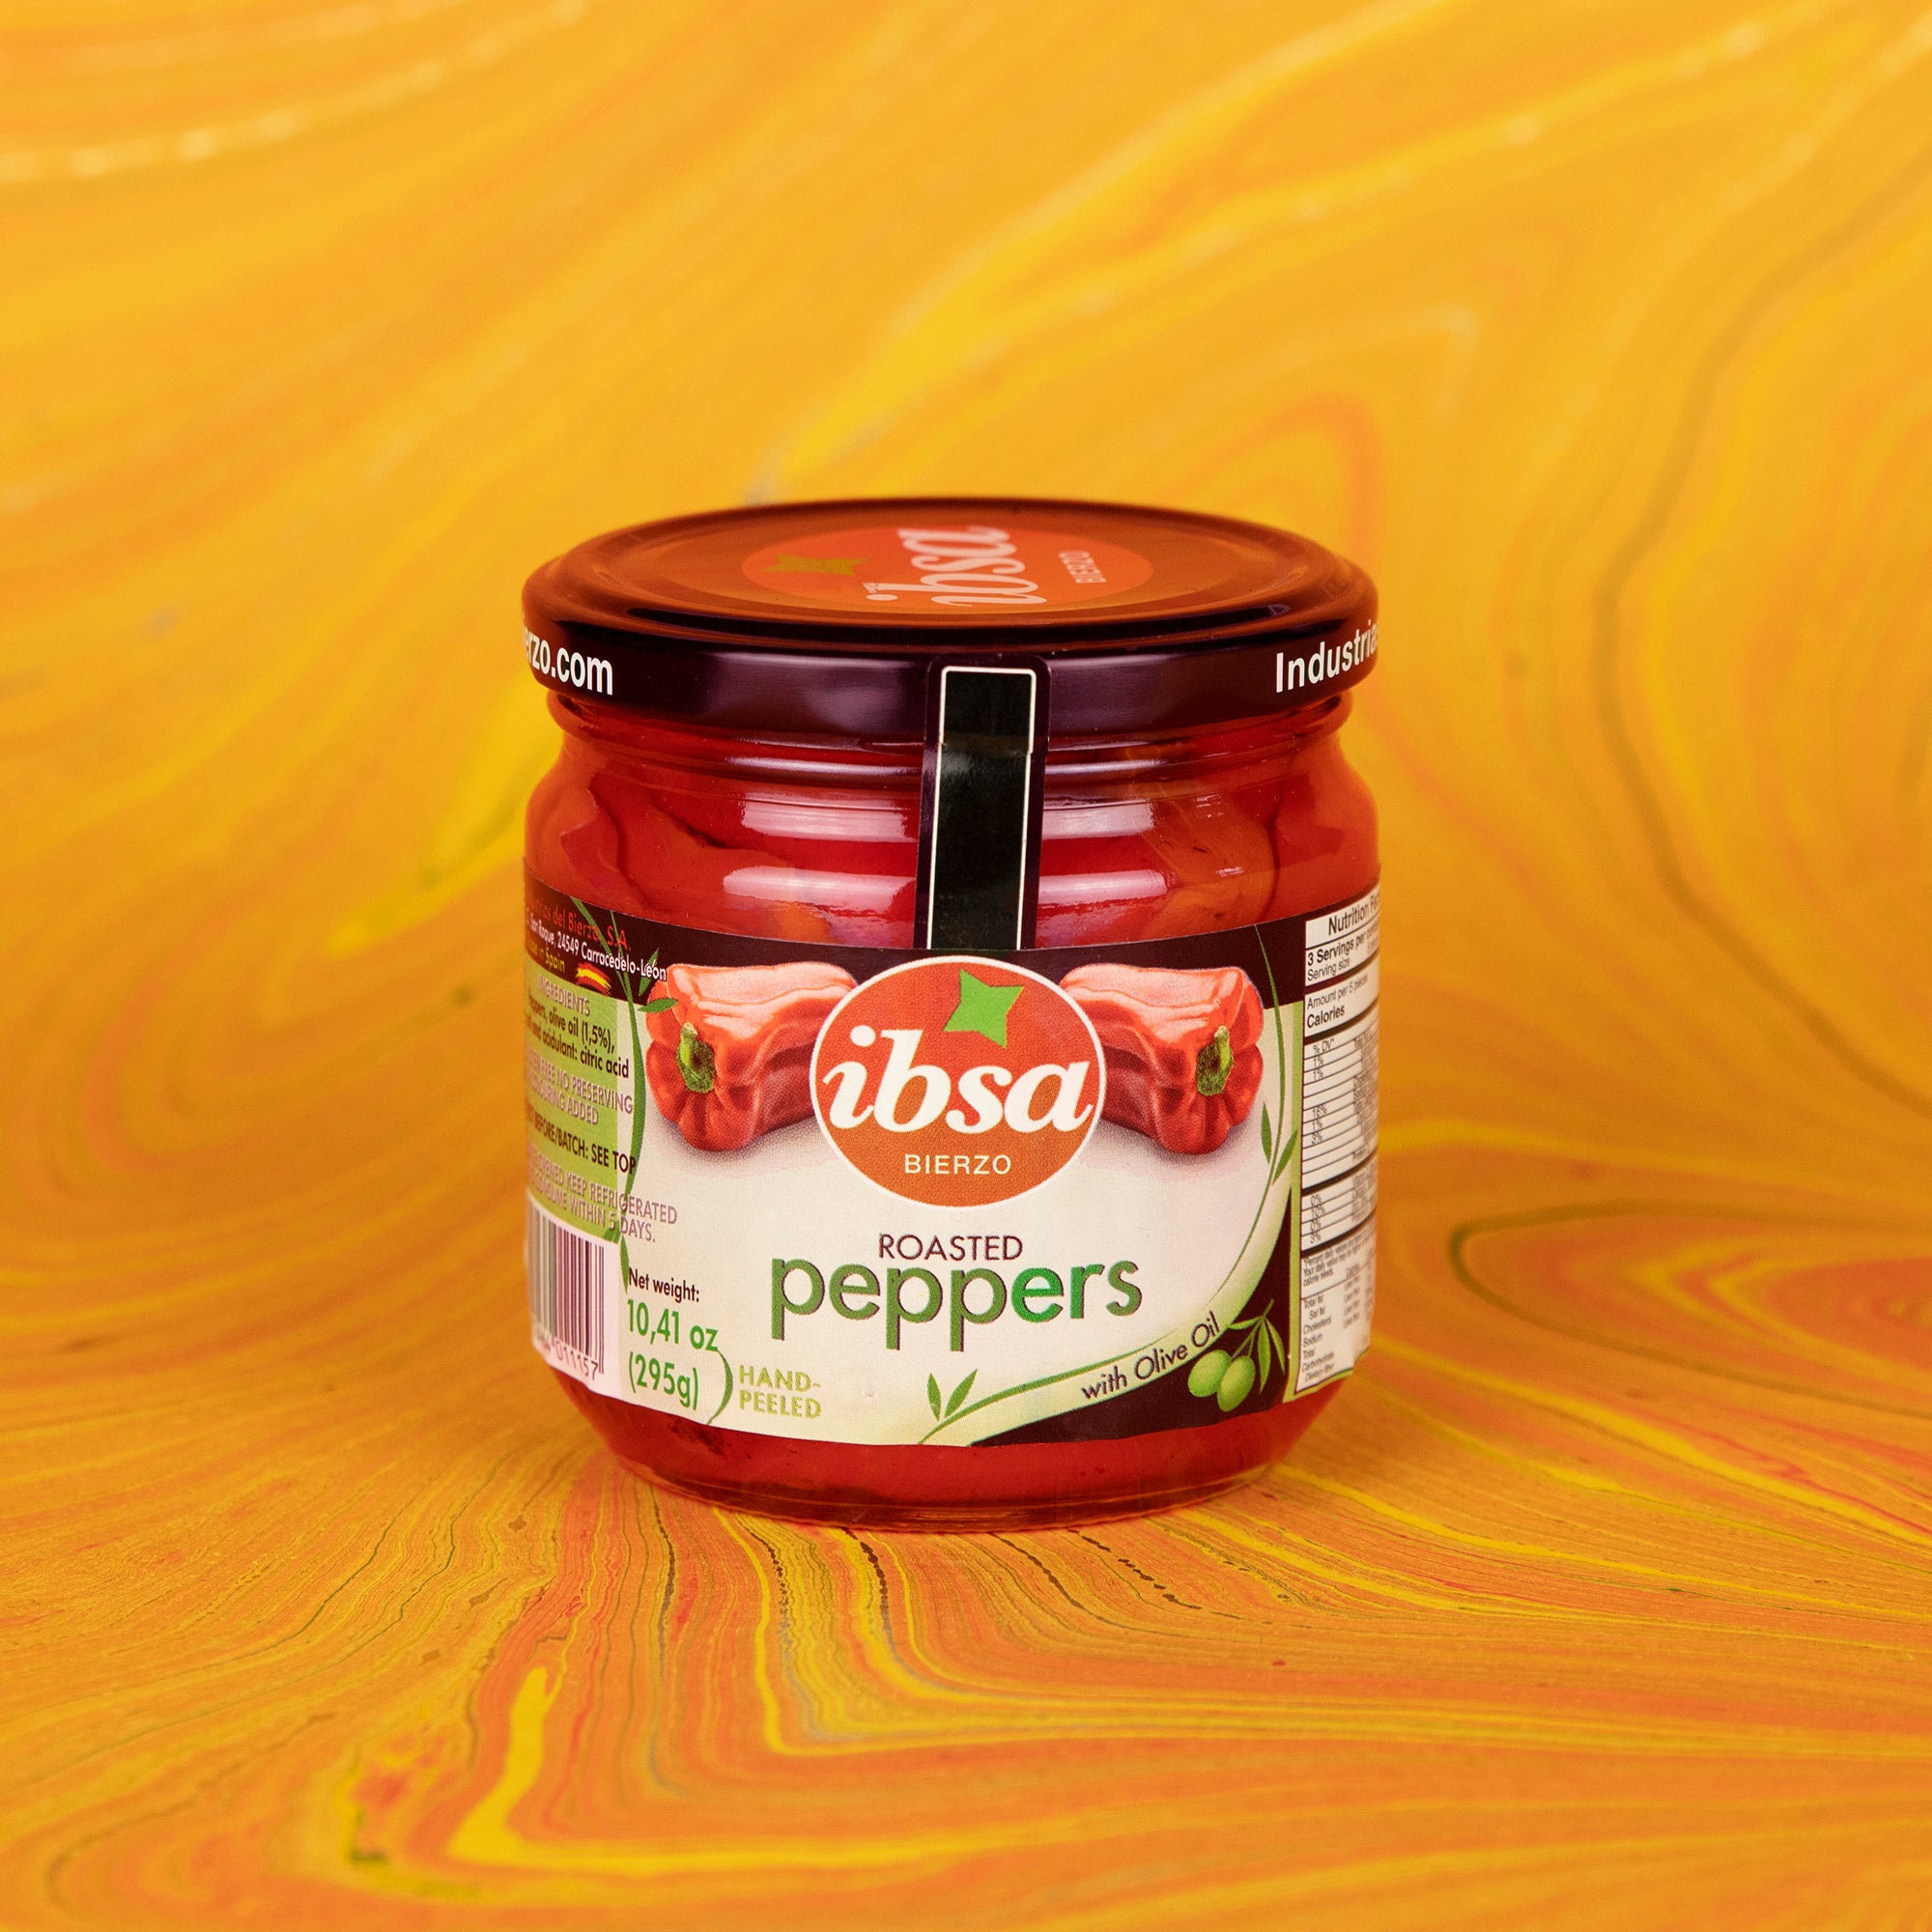 A product photo of a jar of roasted red peppers by the Ibsa brand. 